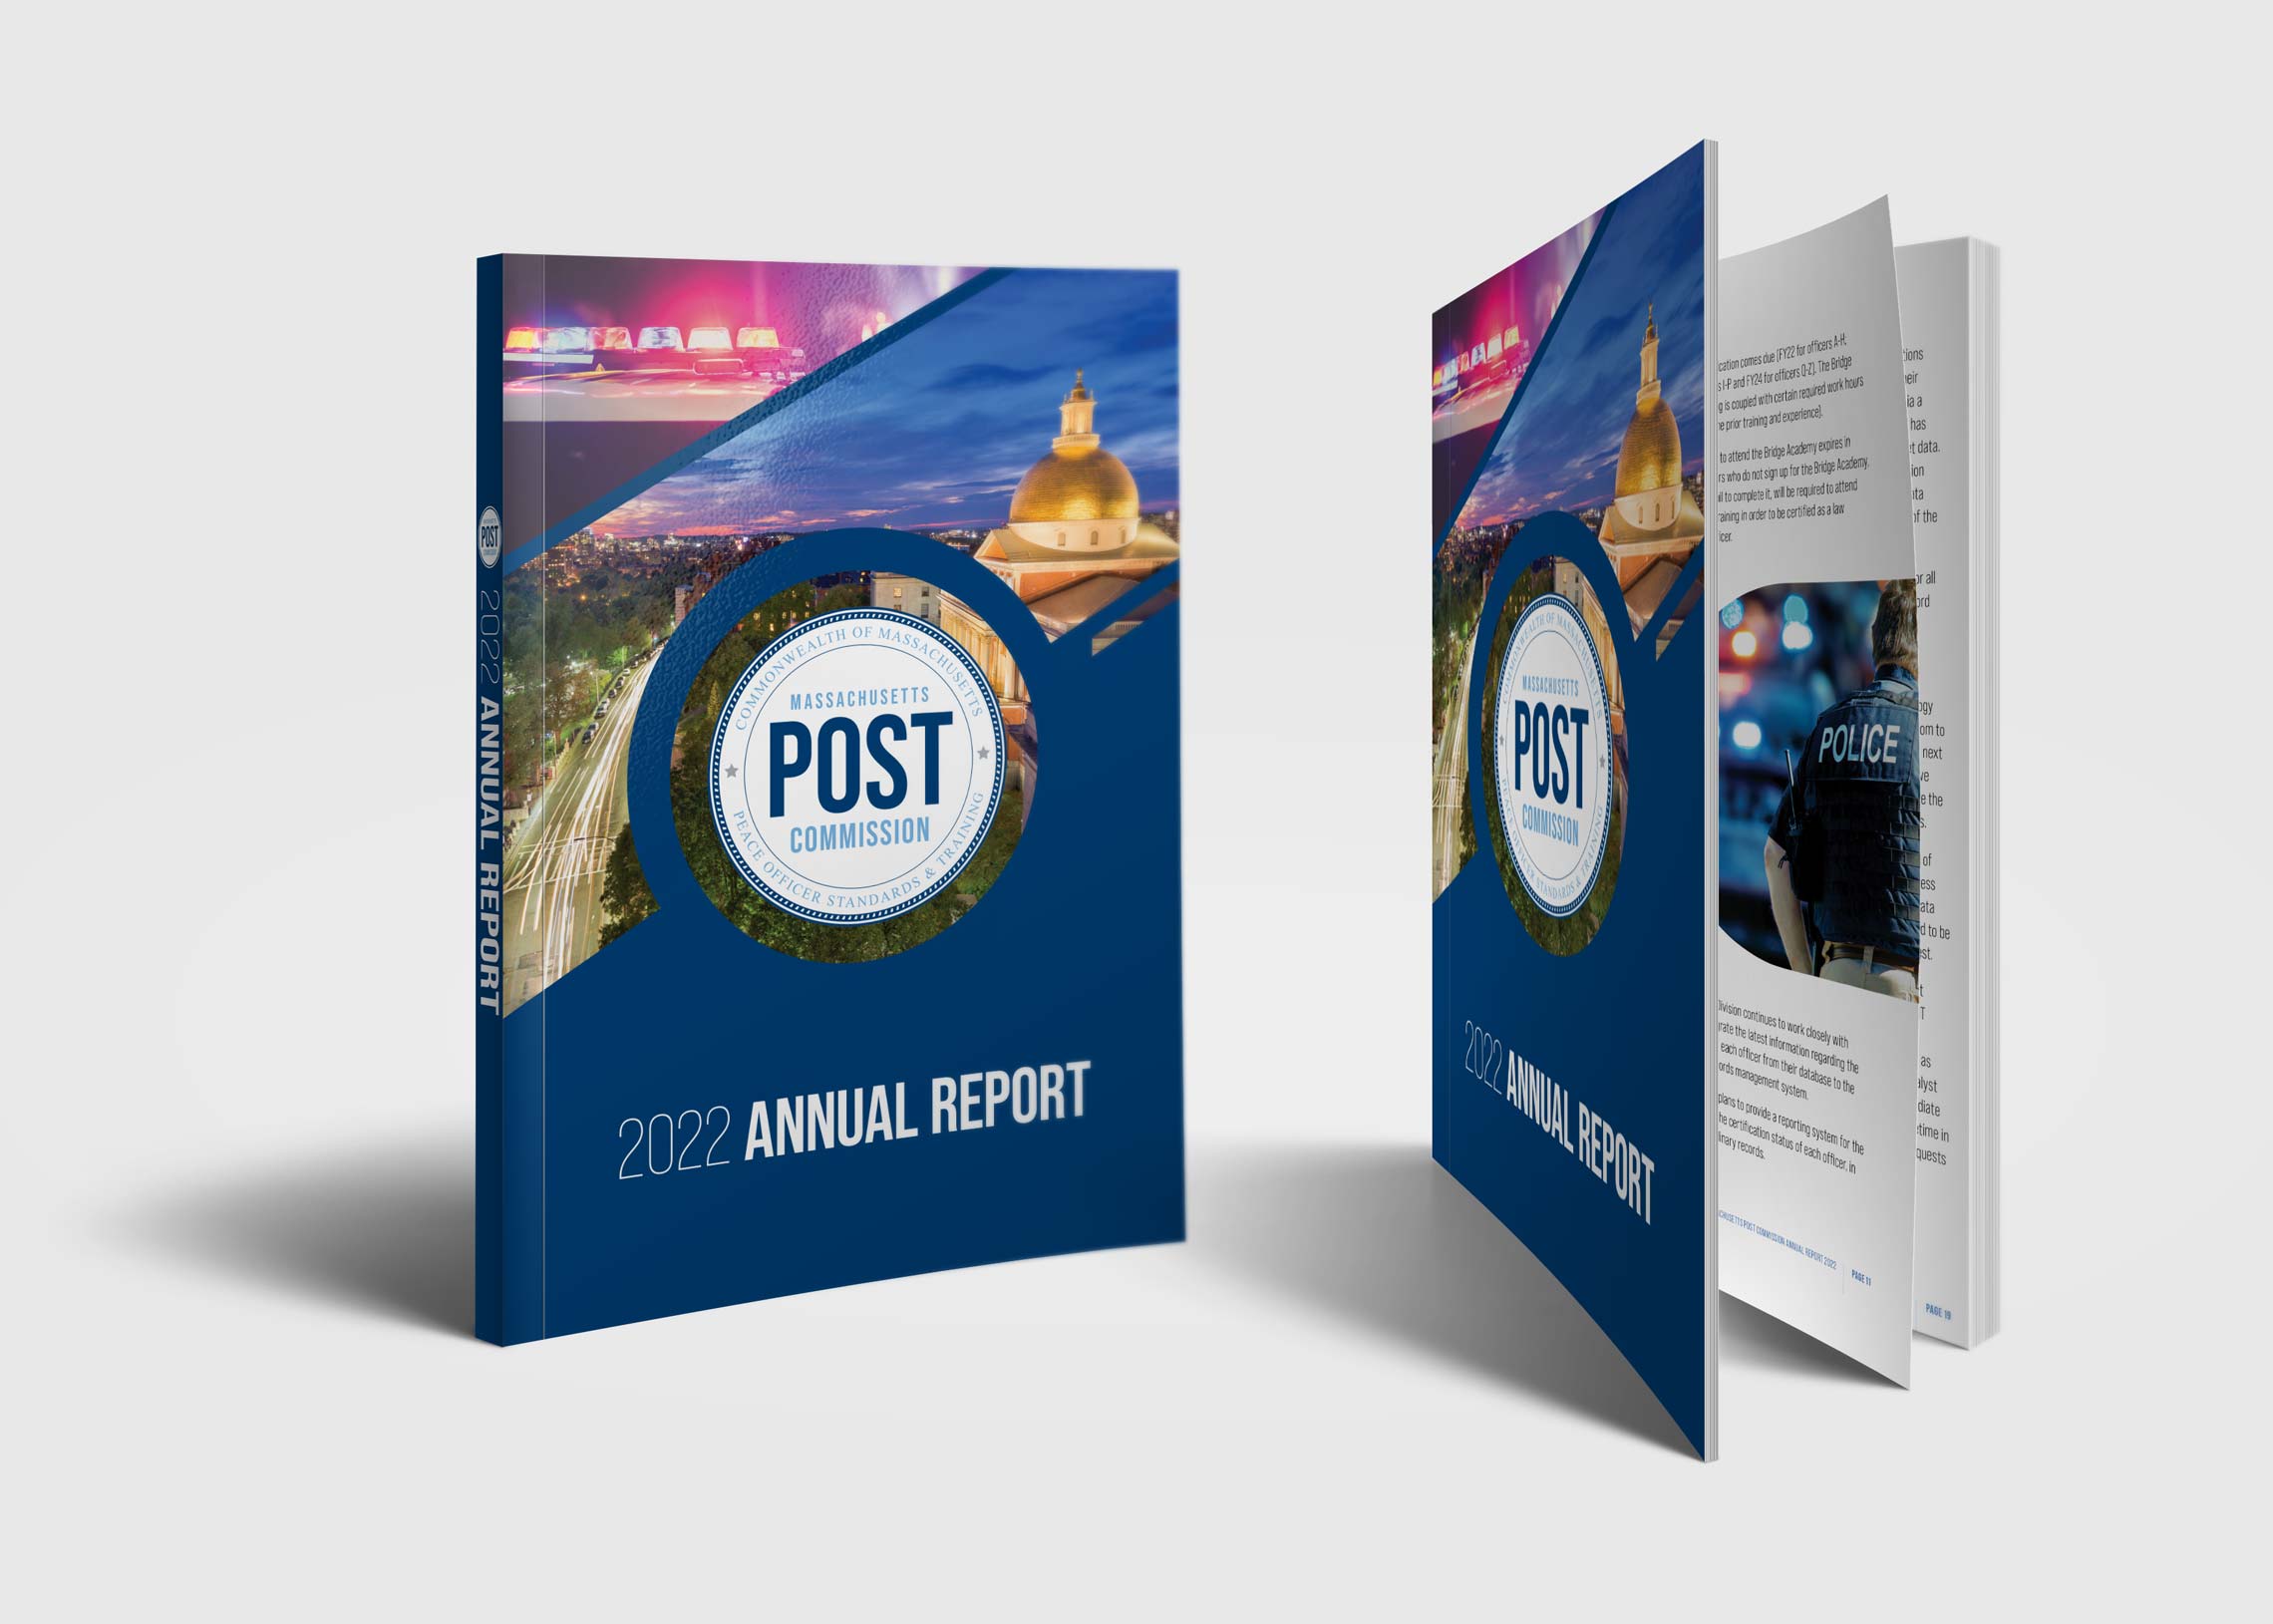 Annual report design for the Massachusetts POST Commission showing cover and interior